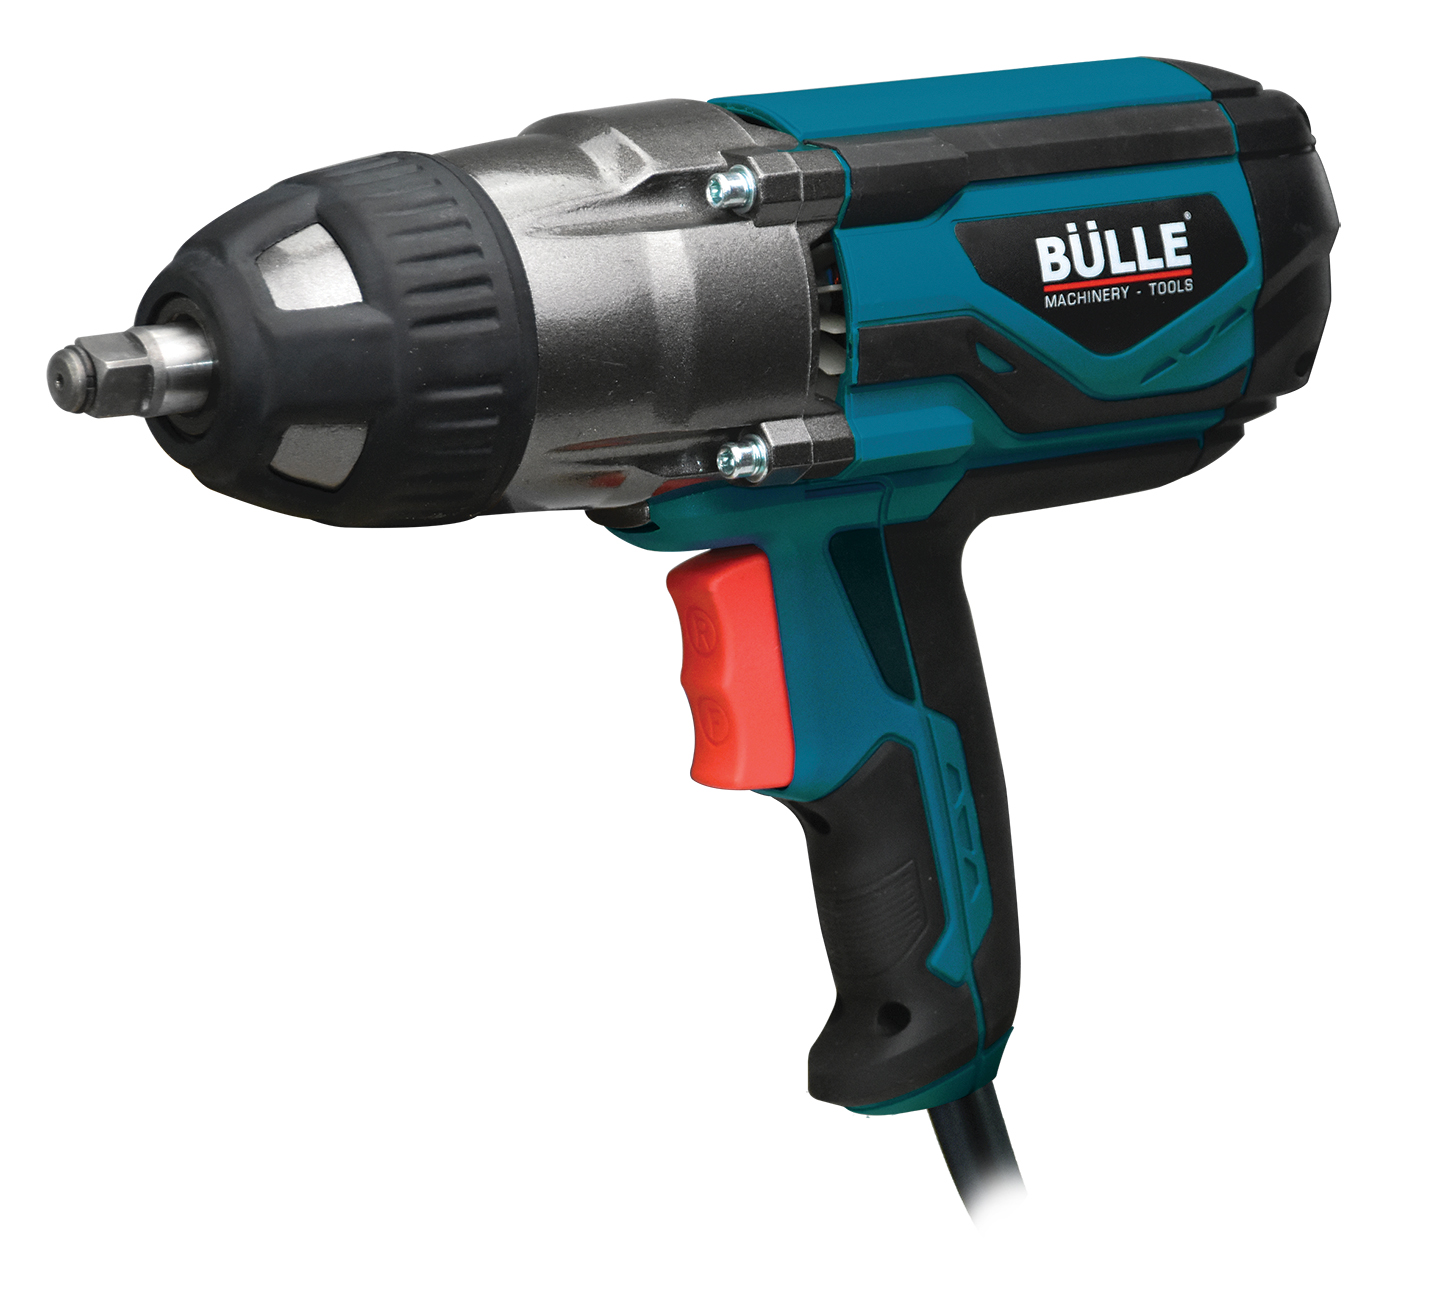 Electric Impact Wrench 1/2" 1020W Bulle